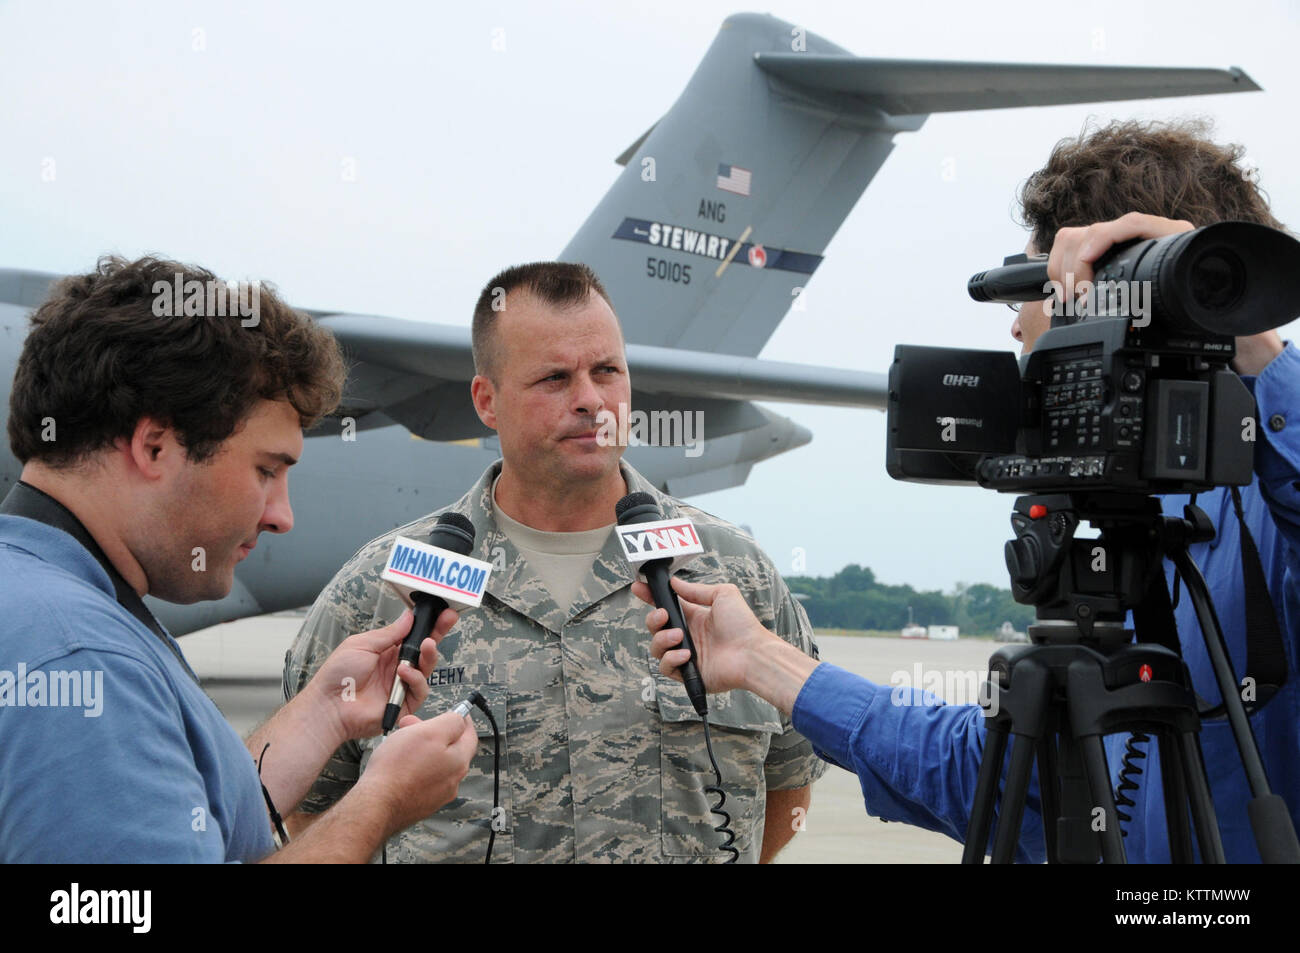 STEWART ANGB, Newburgh, N.Y. --Senior Master Sergeant John Sheehy, the first Dedicated Crew Chief for the 105th Airlift Wing's newest airlifter, the C-17 Globemaster III, is interviewed by reporters from Mid Hudson News.com and YNN after the arrival of the wings initial C-17, July 18, 2011. (U.S. Air Force Photo by Tech. Sgt. Michael R. OHalloran)(released) Stock Photo